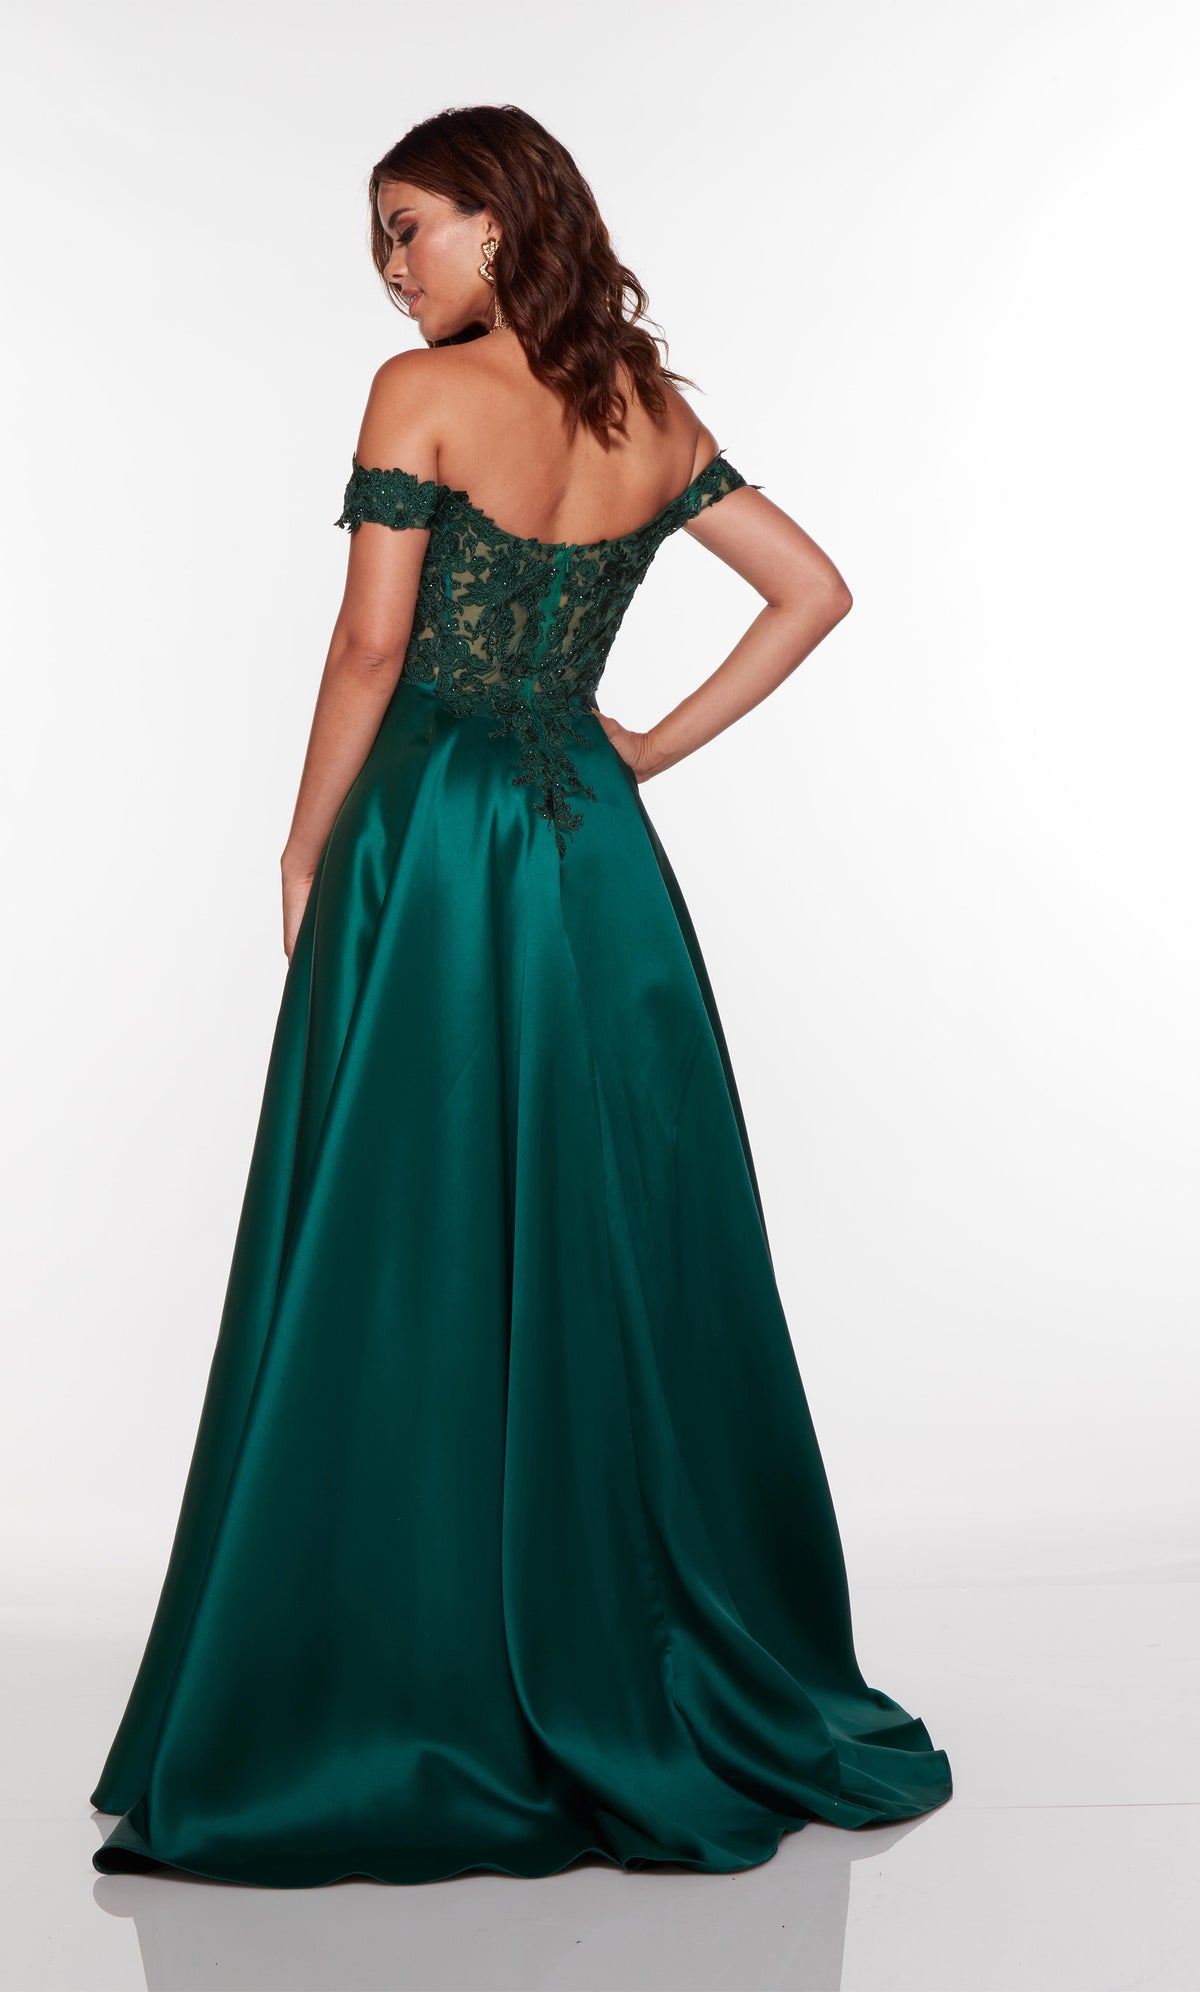 Off the shoulder green corset dress with a sheer lace bodice.